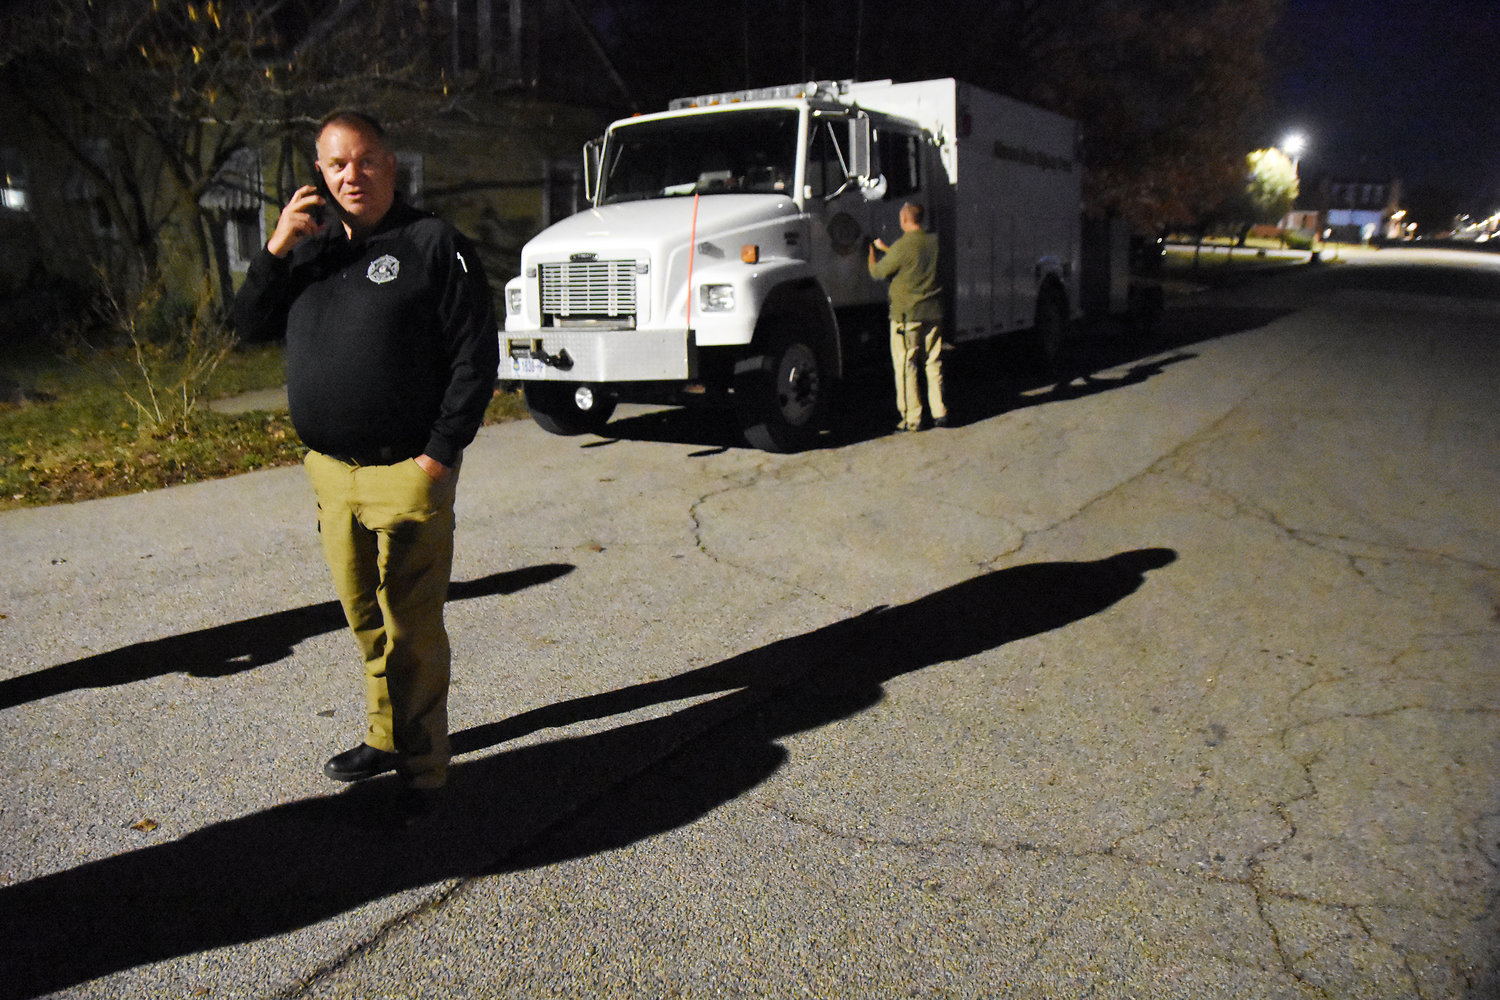 SHERIFF SCOTT EILER receives an update on Hyde’s medical status after he was transported to Mercy Washington for a “fit for confinement” examination following his arrest. The Missouri State High Highway Patrol’s Bomb Squad is parked behind him.